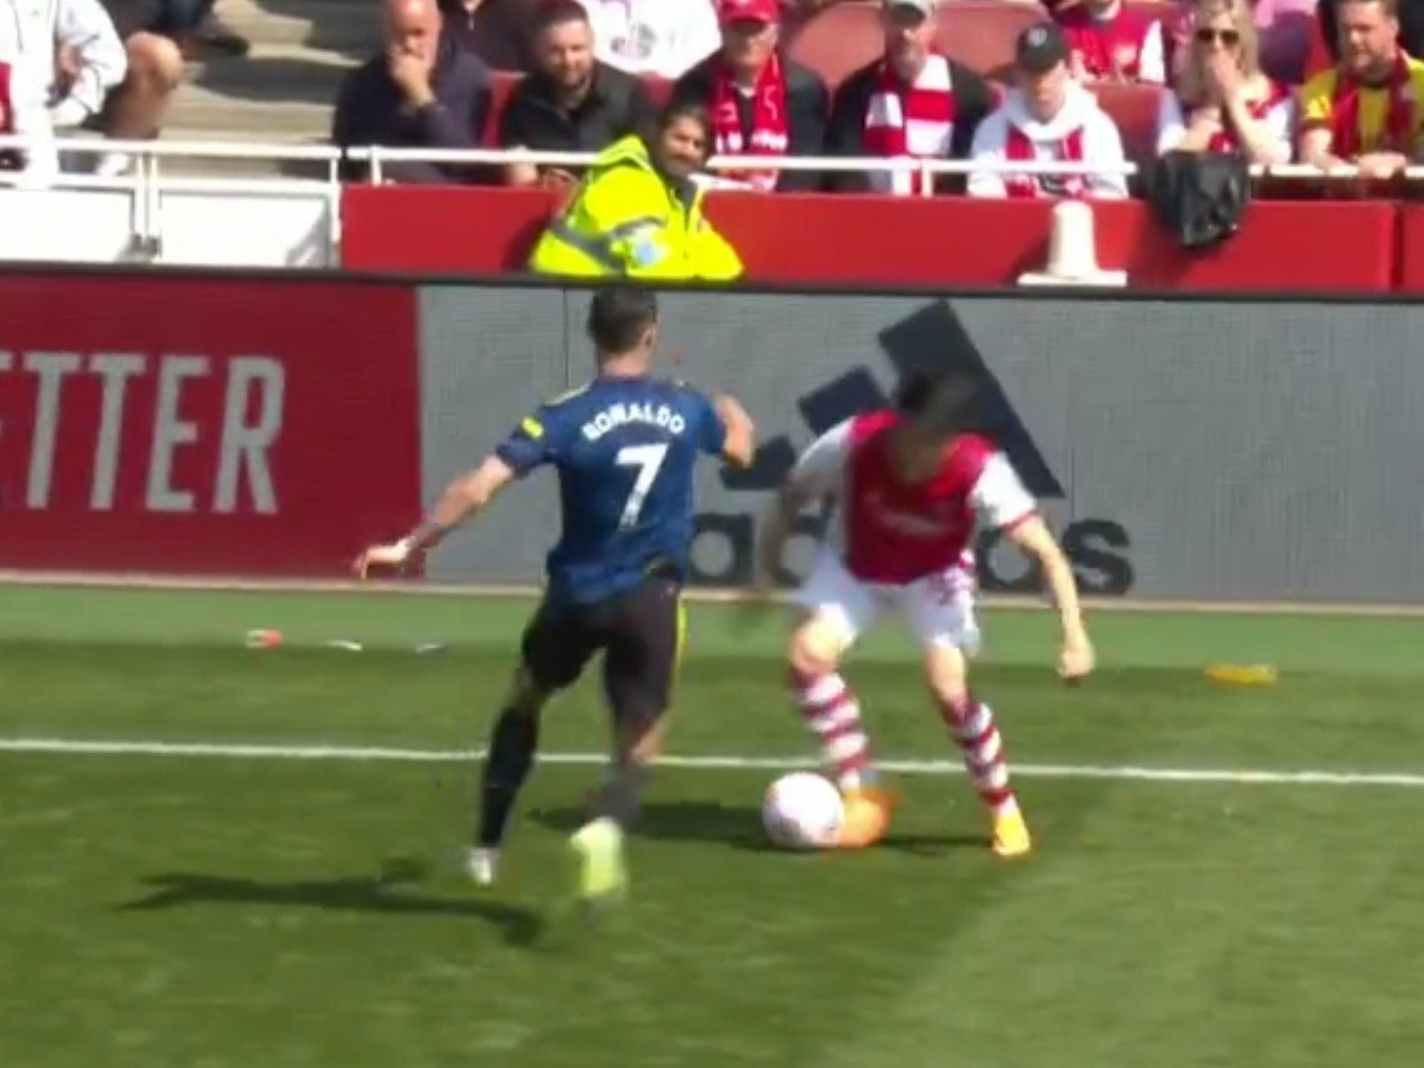 Arsenal fans loved how Takehiro Tomiyasu came on and dribbled past Cristiano Ronaldo